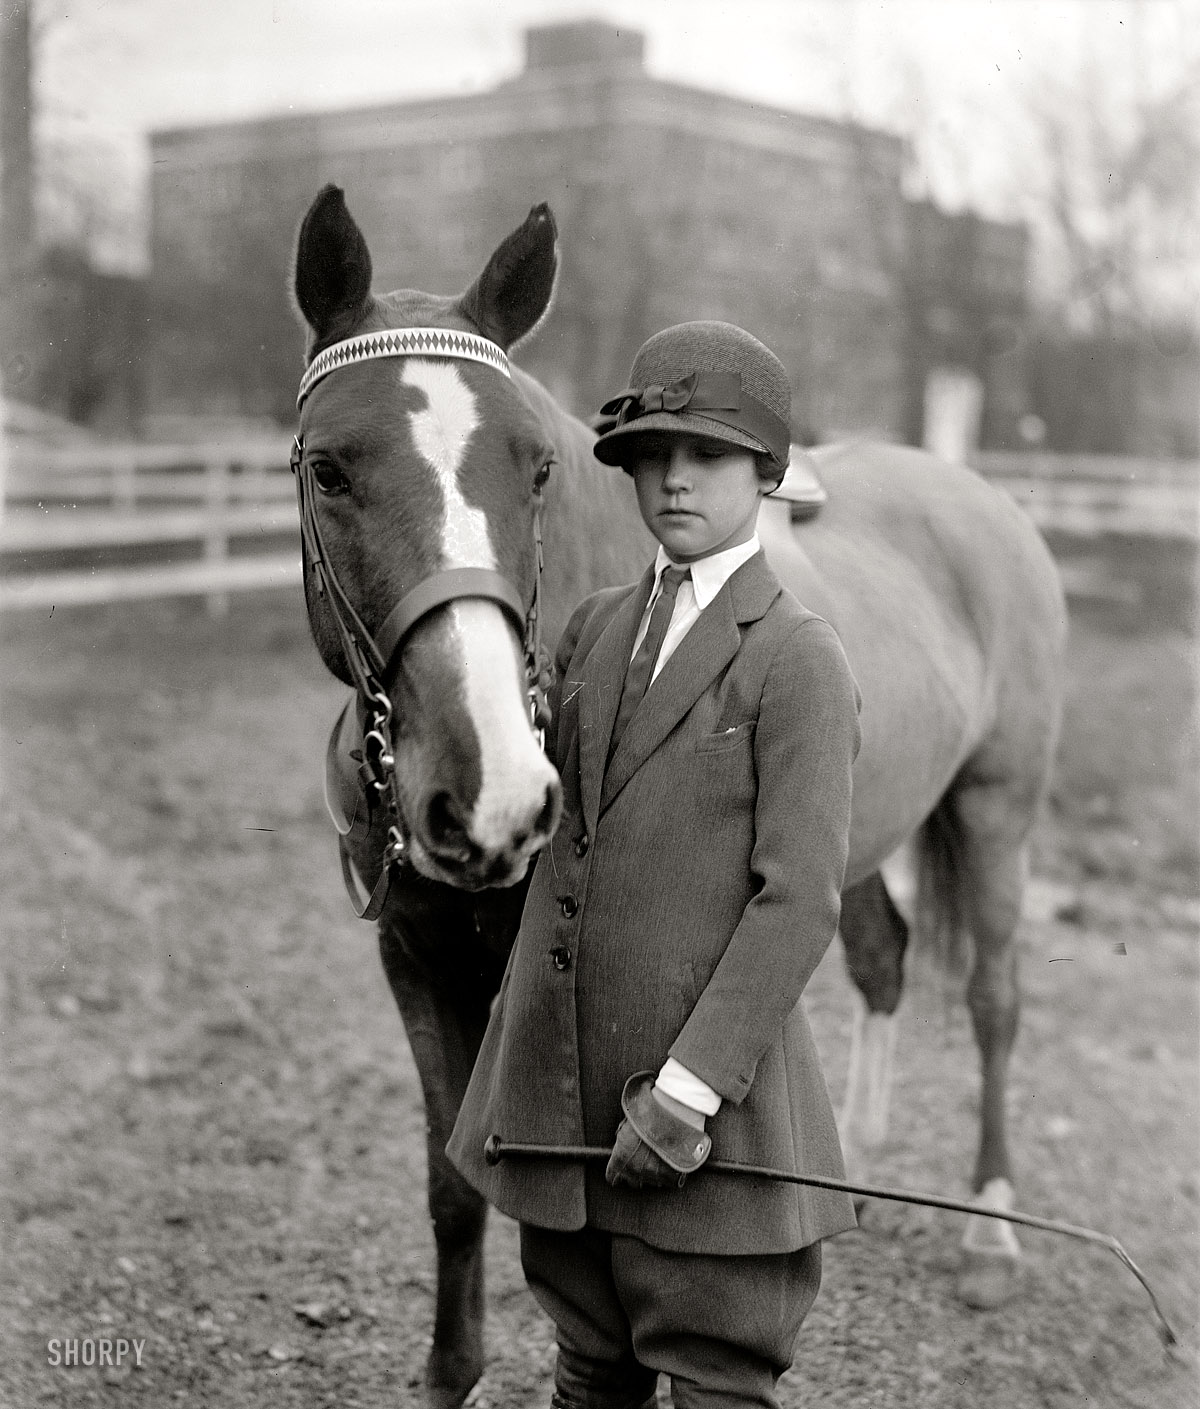 February 19, 1927. "Katharine Meyer." Daughter of Eugene Meyer and, as the widow of Philip Graham, future publisher of the Washington Post. Also probably the only subject of a Shorpy post that I've ever seen in person. View full size.